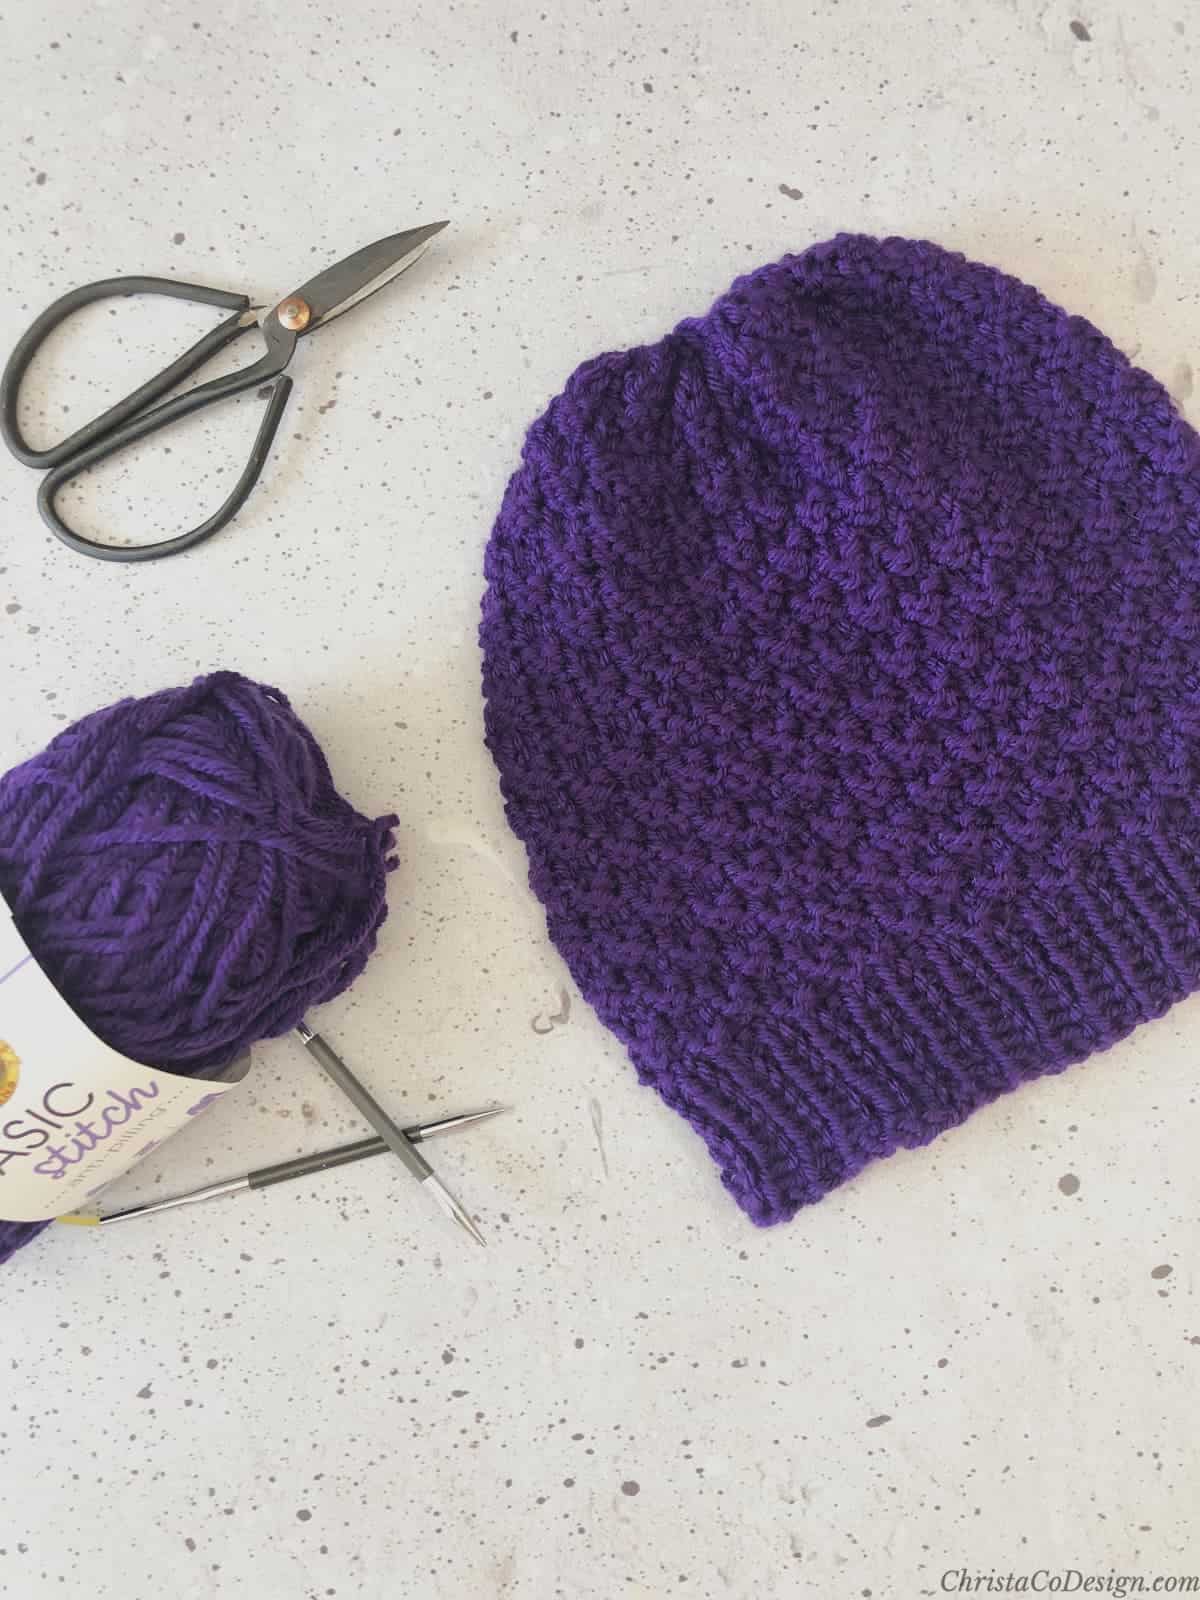 The purple knit hat is laid flat with yarn, needle and scissors.